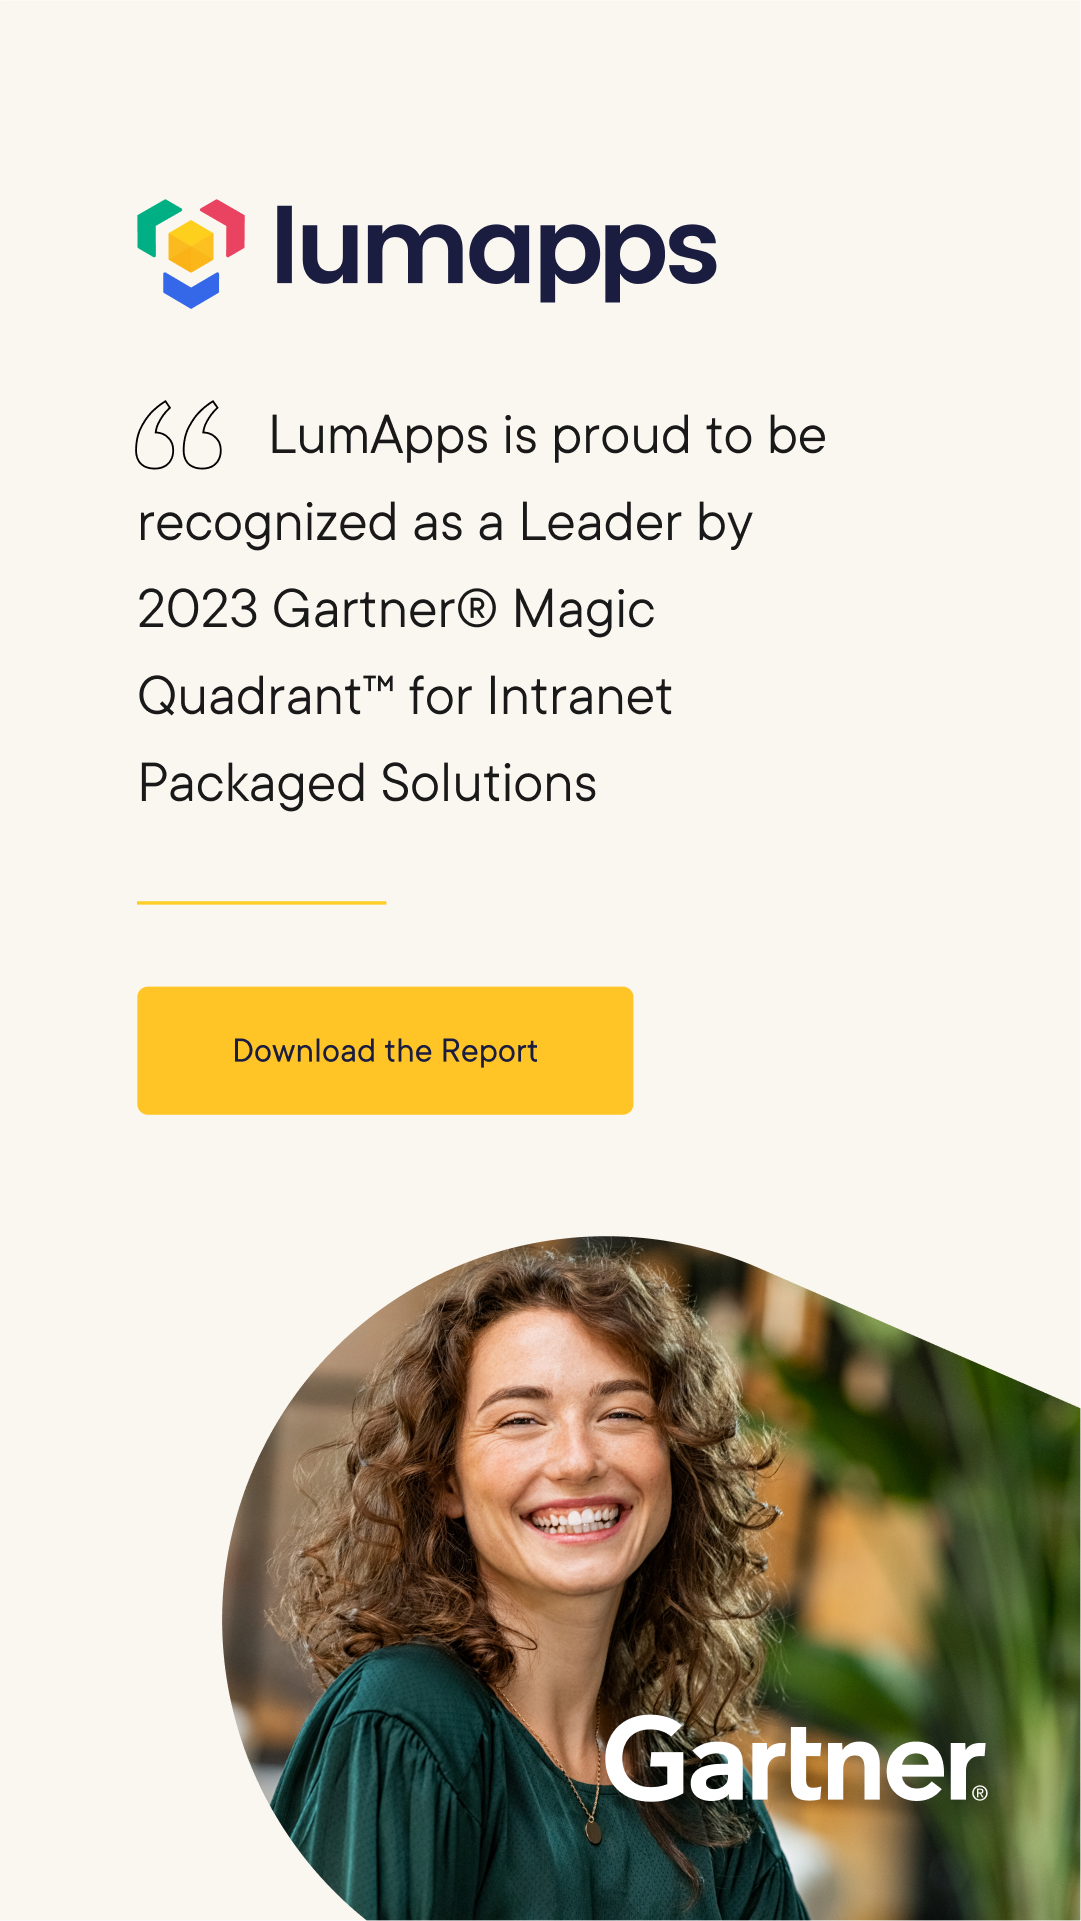 Download the Gartner Magic Quadrant for Intranet Packaged Solutions to see why LumApps is a Leader in intranets